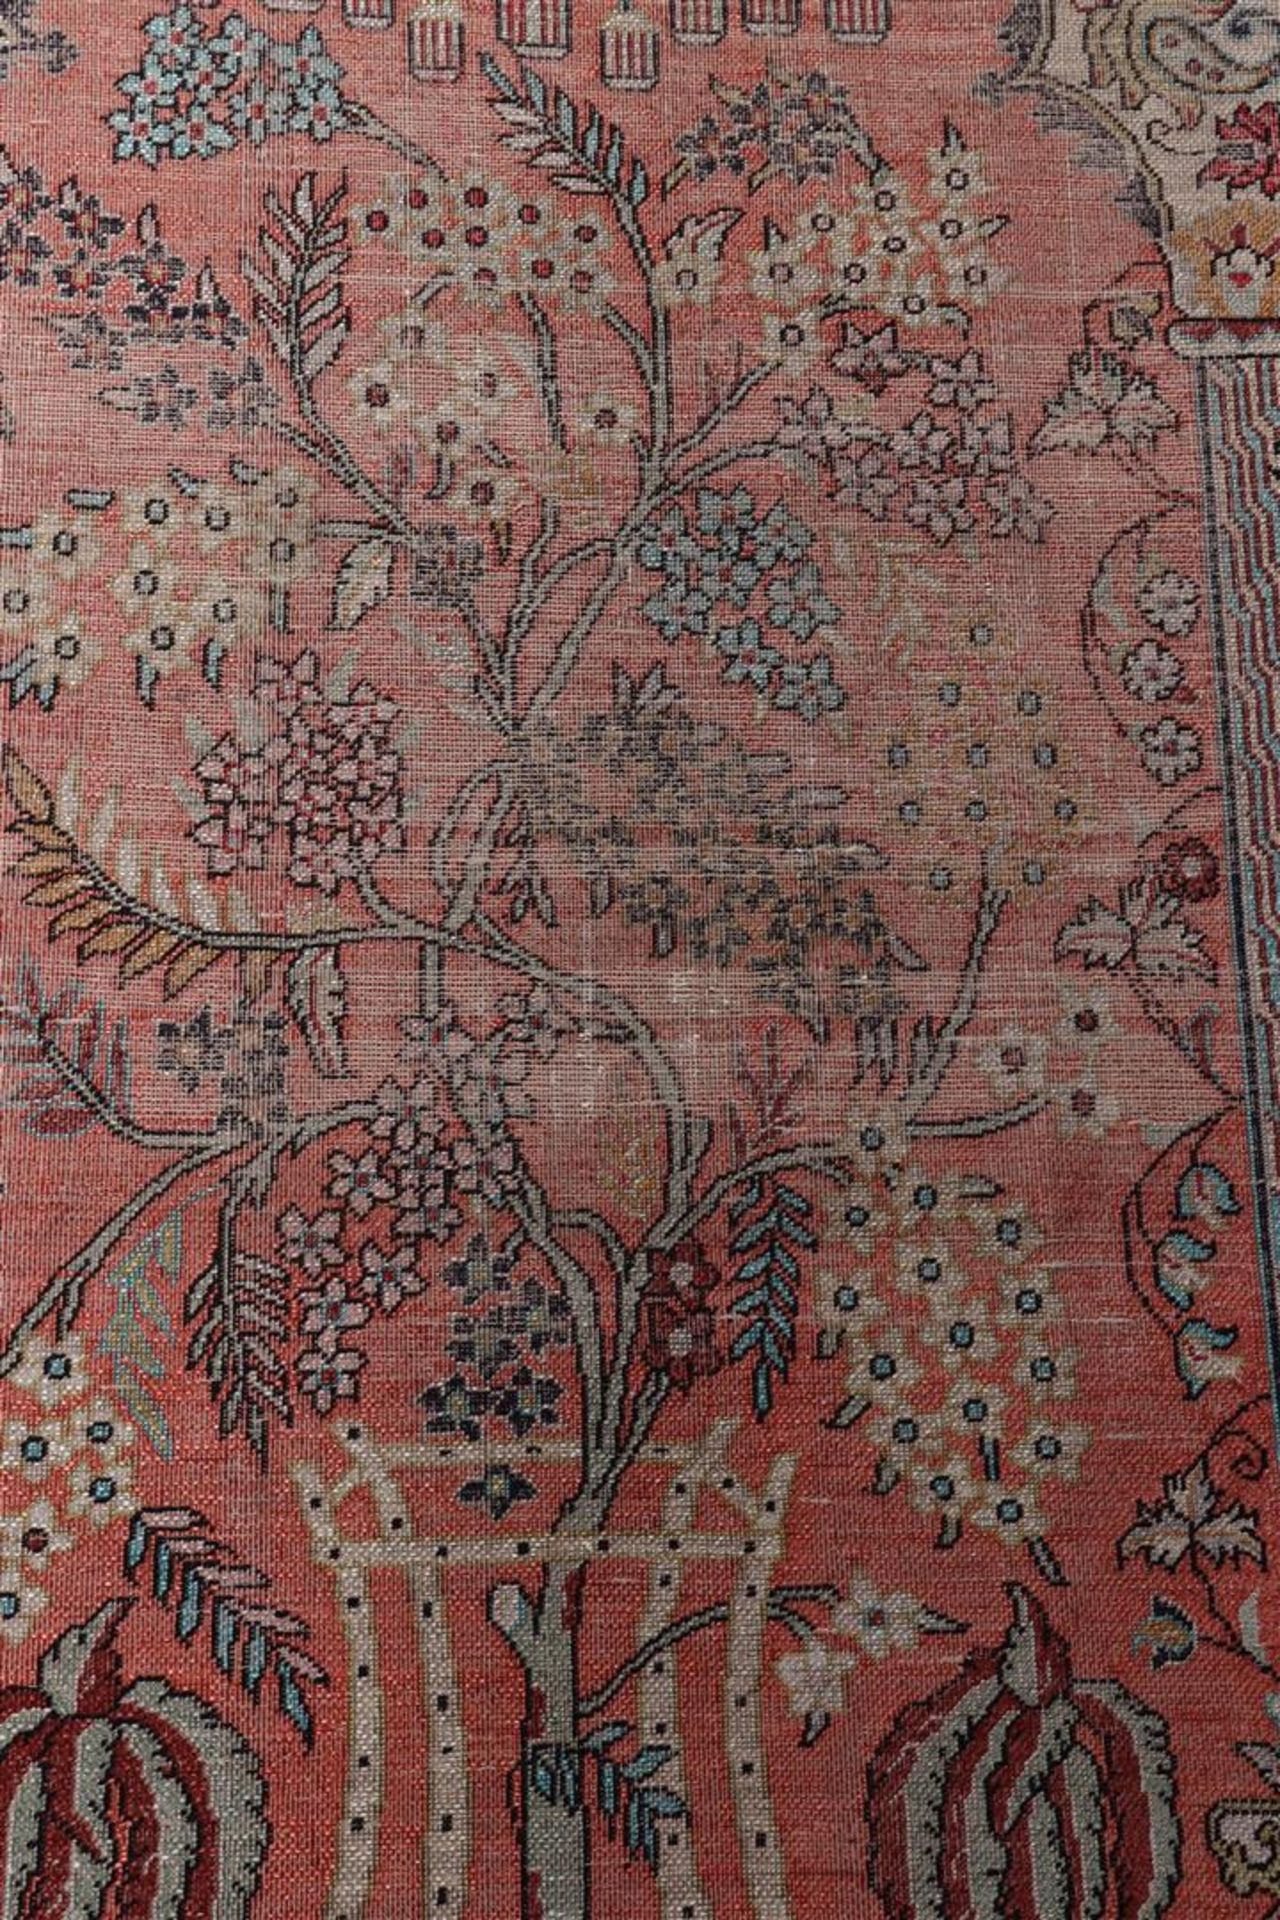 Hand-knotted cashmere silk carpet, 150x110 cm - Image 2 of 3